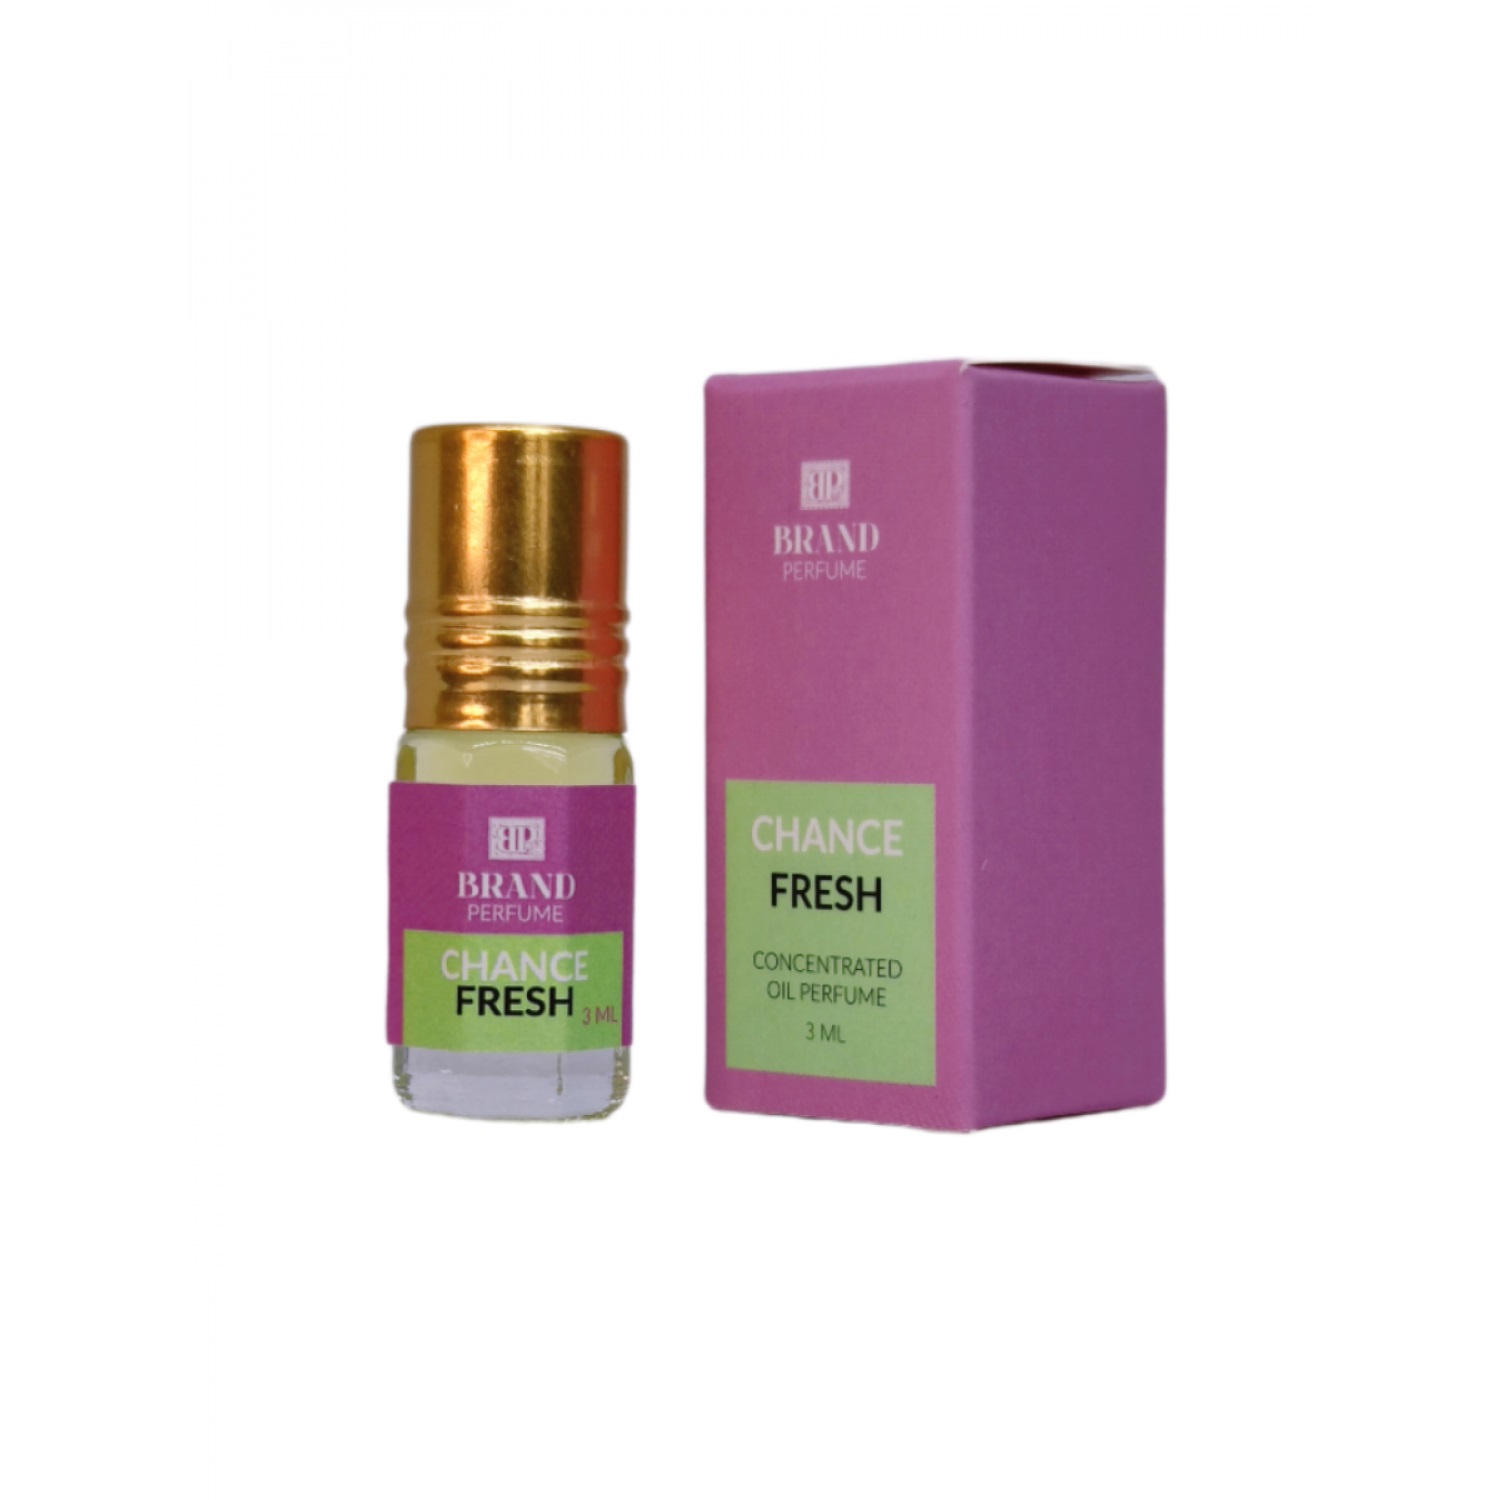 CHANCE FRESH Concentrated Oil Perfume, Brand Perfume (ШАНС ФРЕШ Концентрированные масляные духи), ролик, 3 мл.